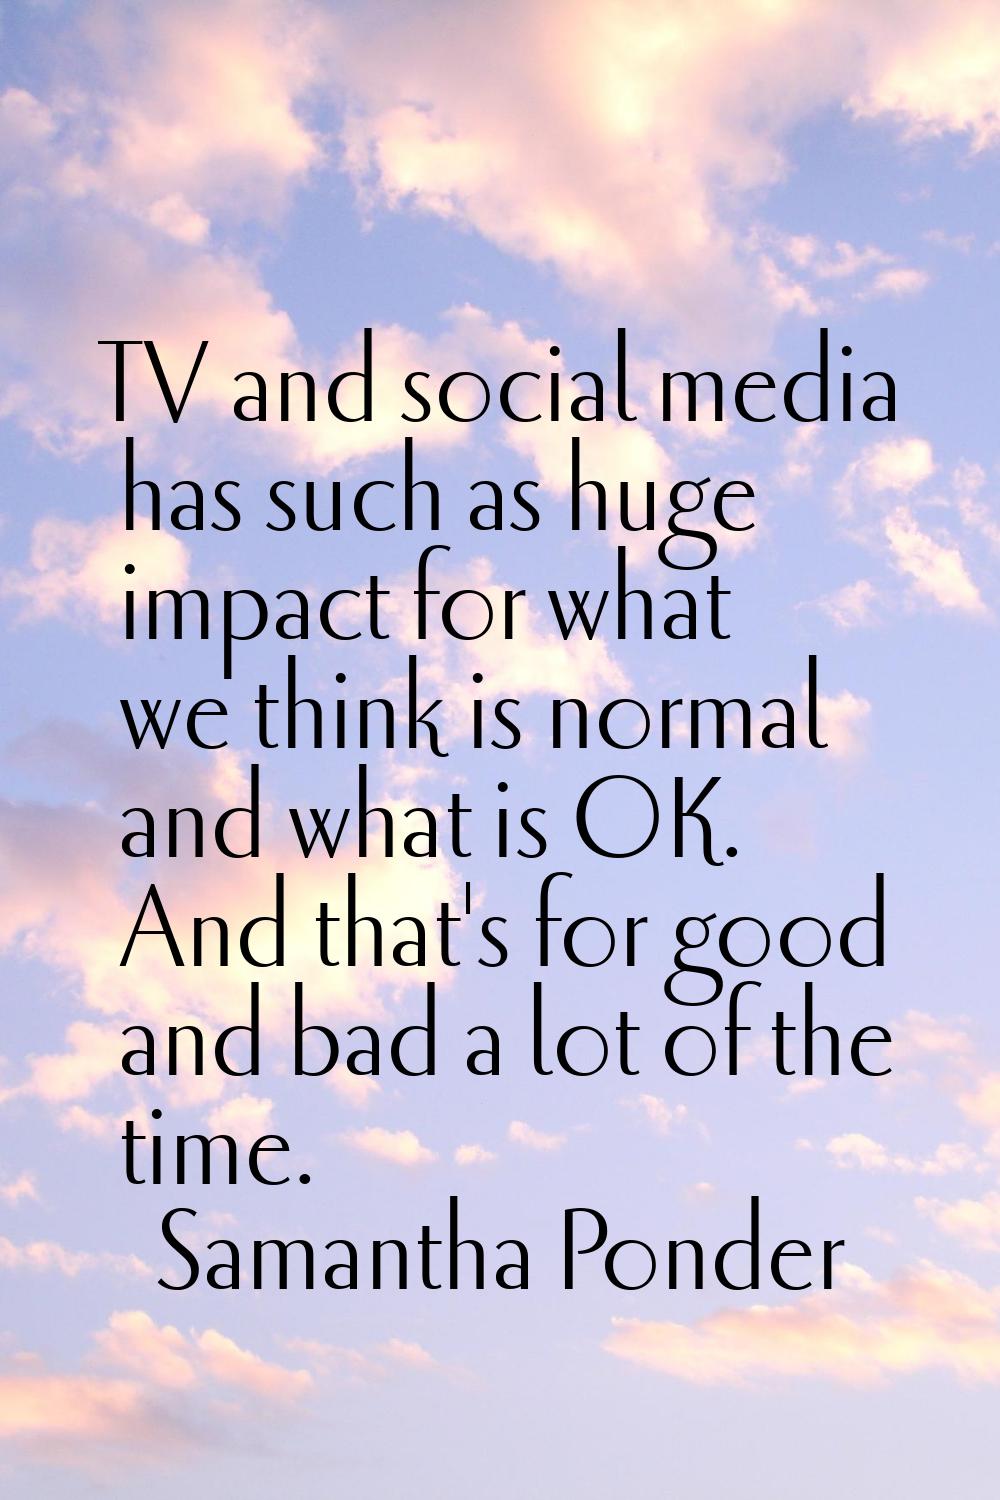 TV and social media has such as huge impact for what we think is normal and what is OK. And that's 